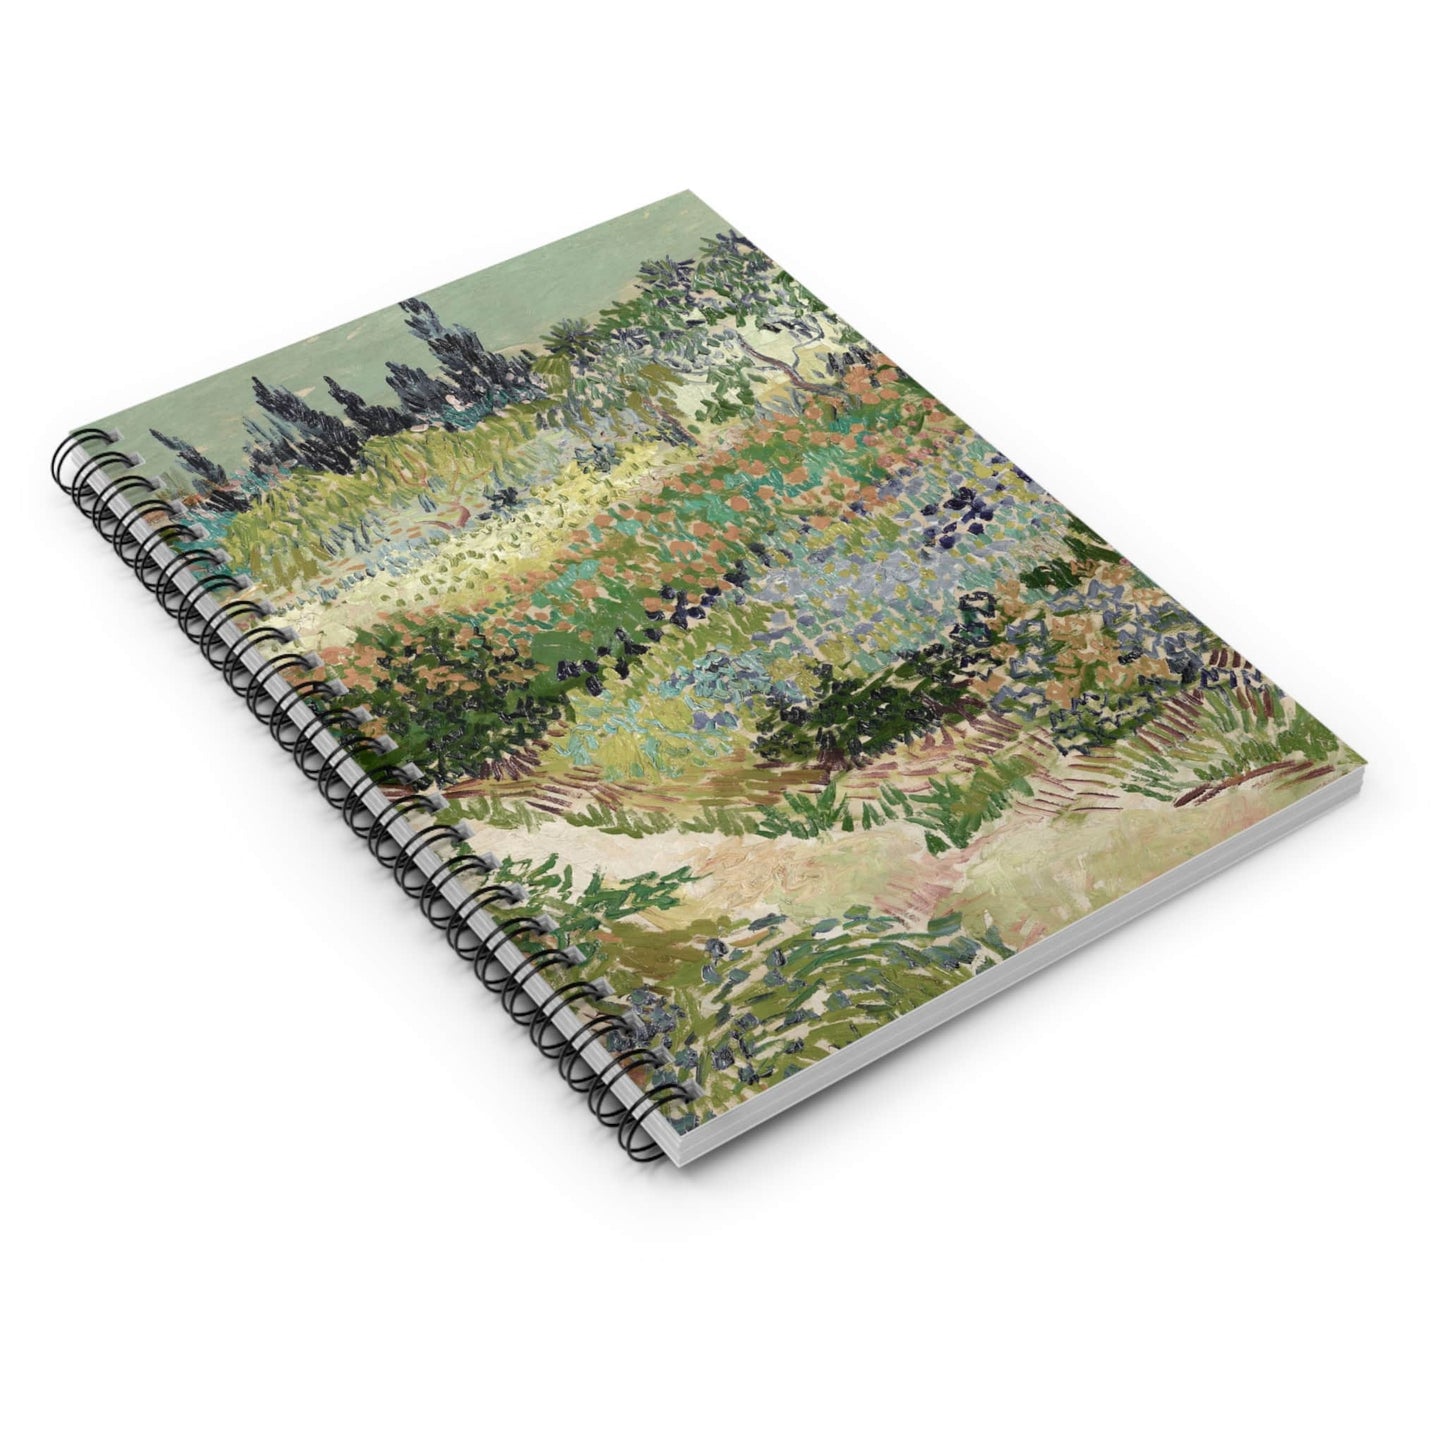 Nature Landscape Spiral Notebook Laying Flat on White Surface